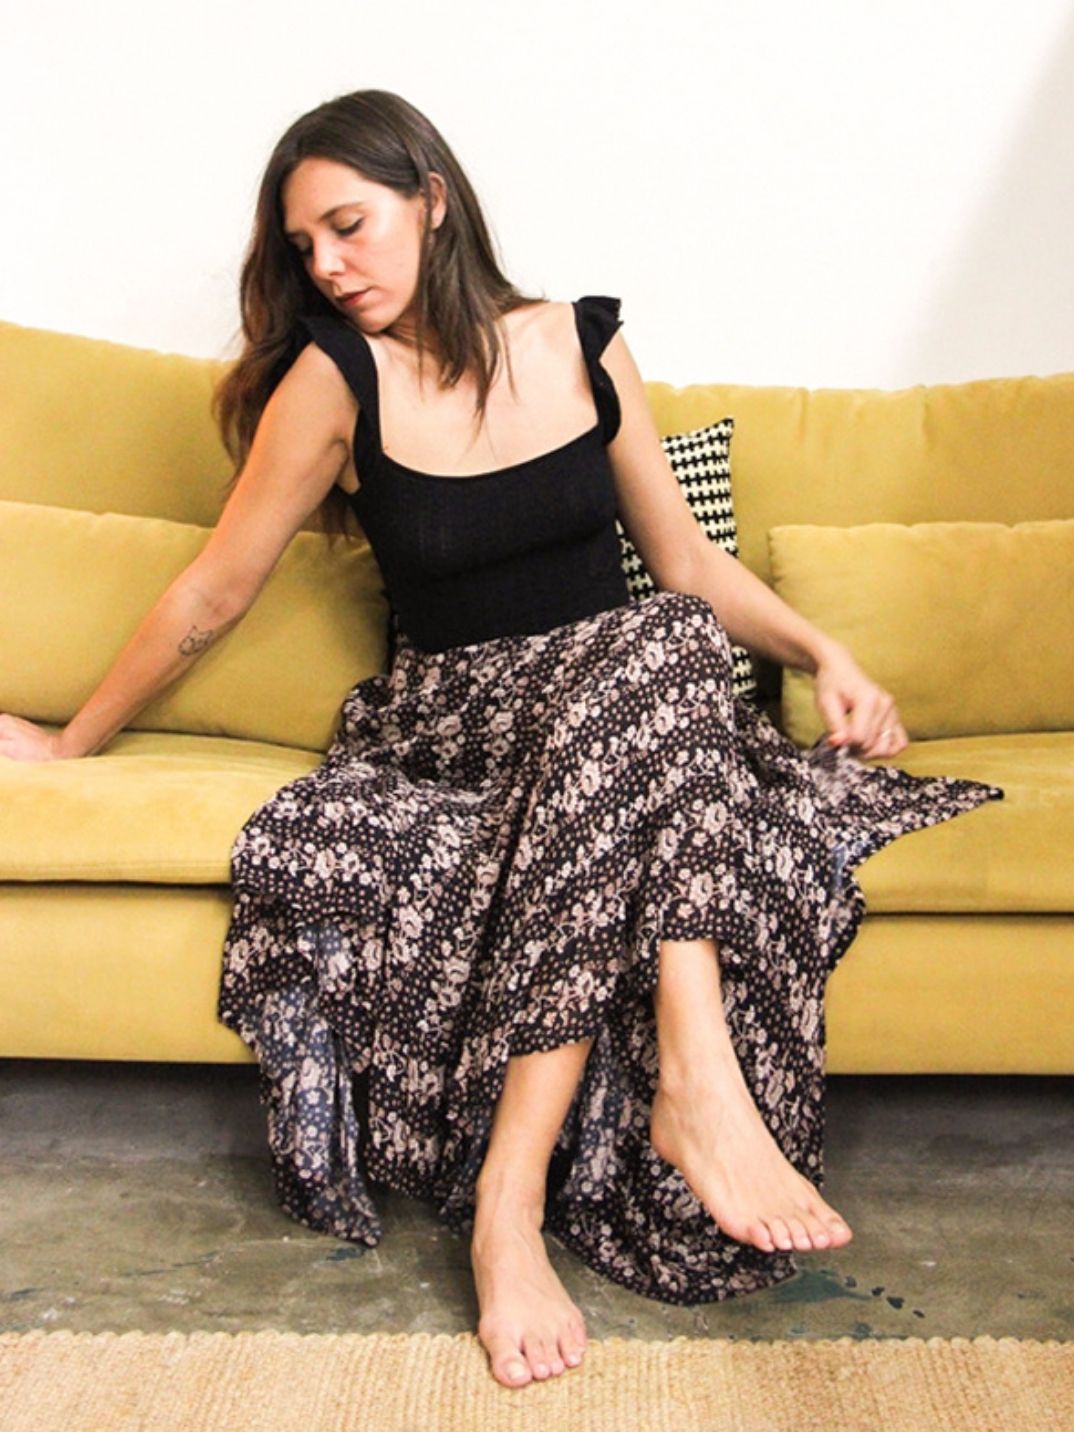 lightweight skirt ethically made in India gives back to charity women's fashion cute skirt